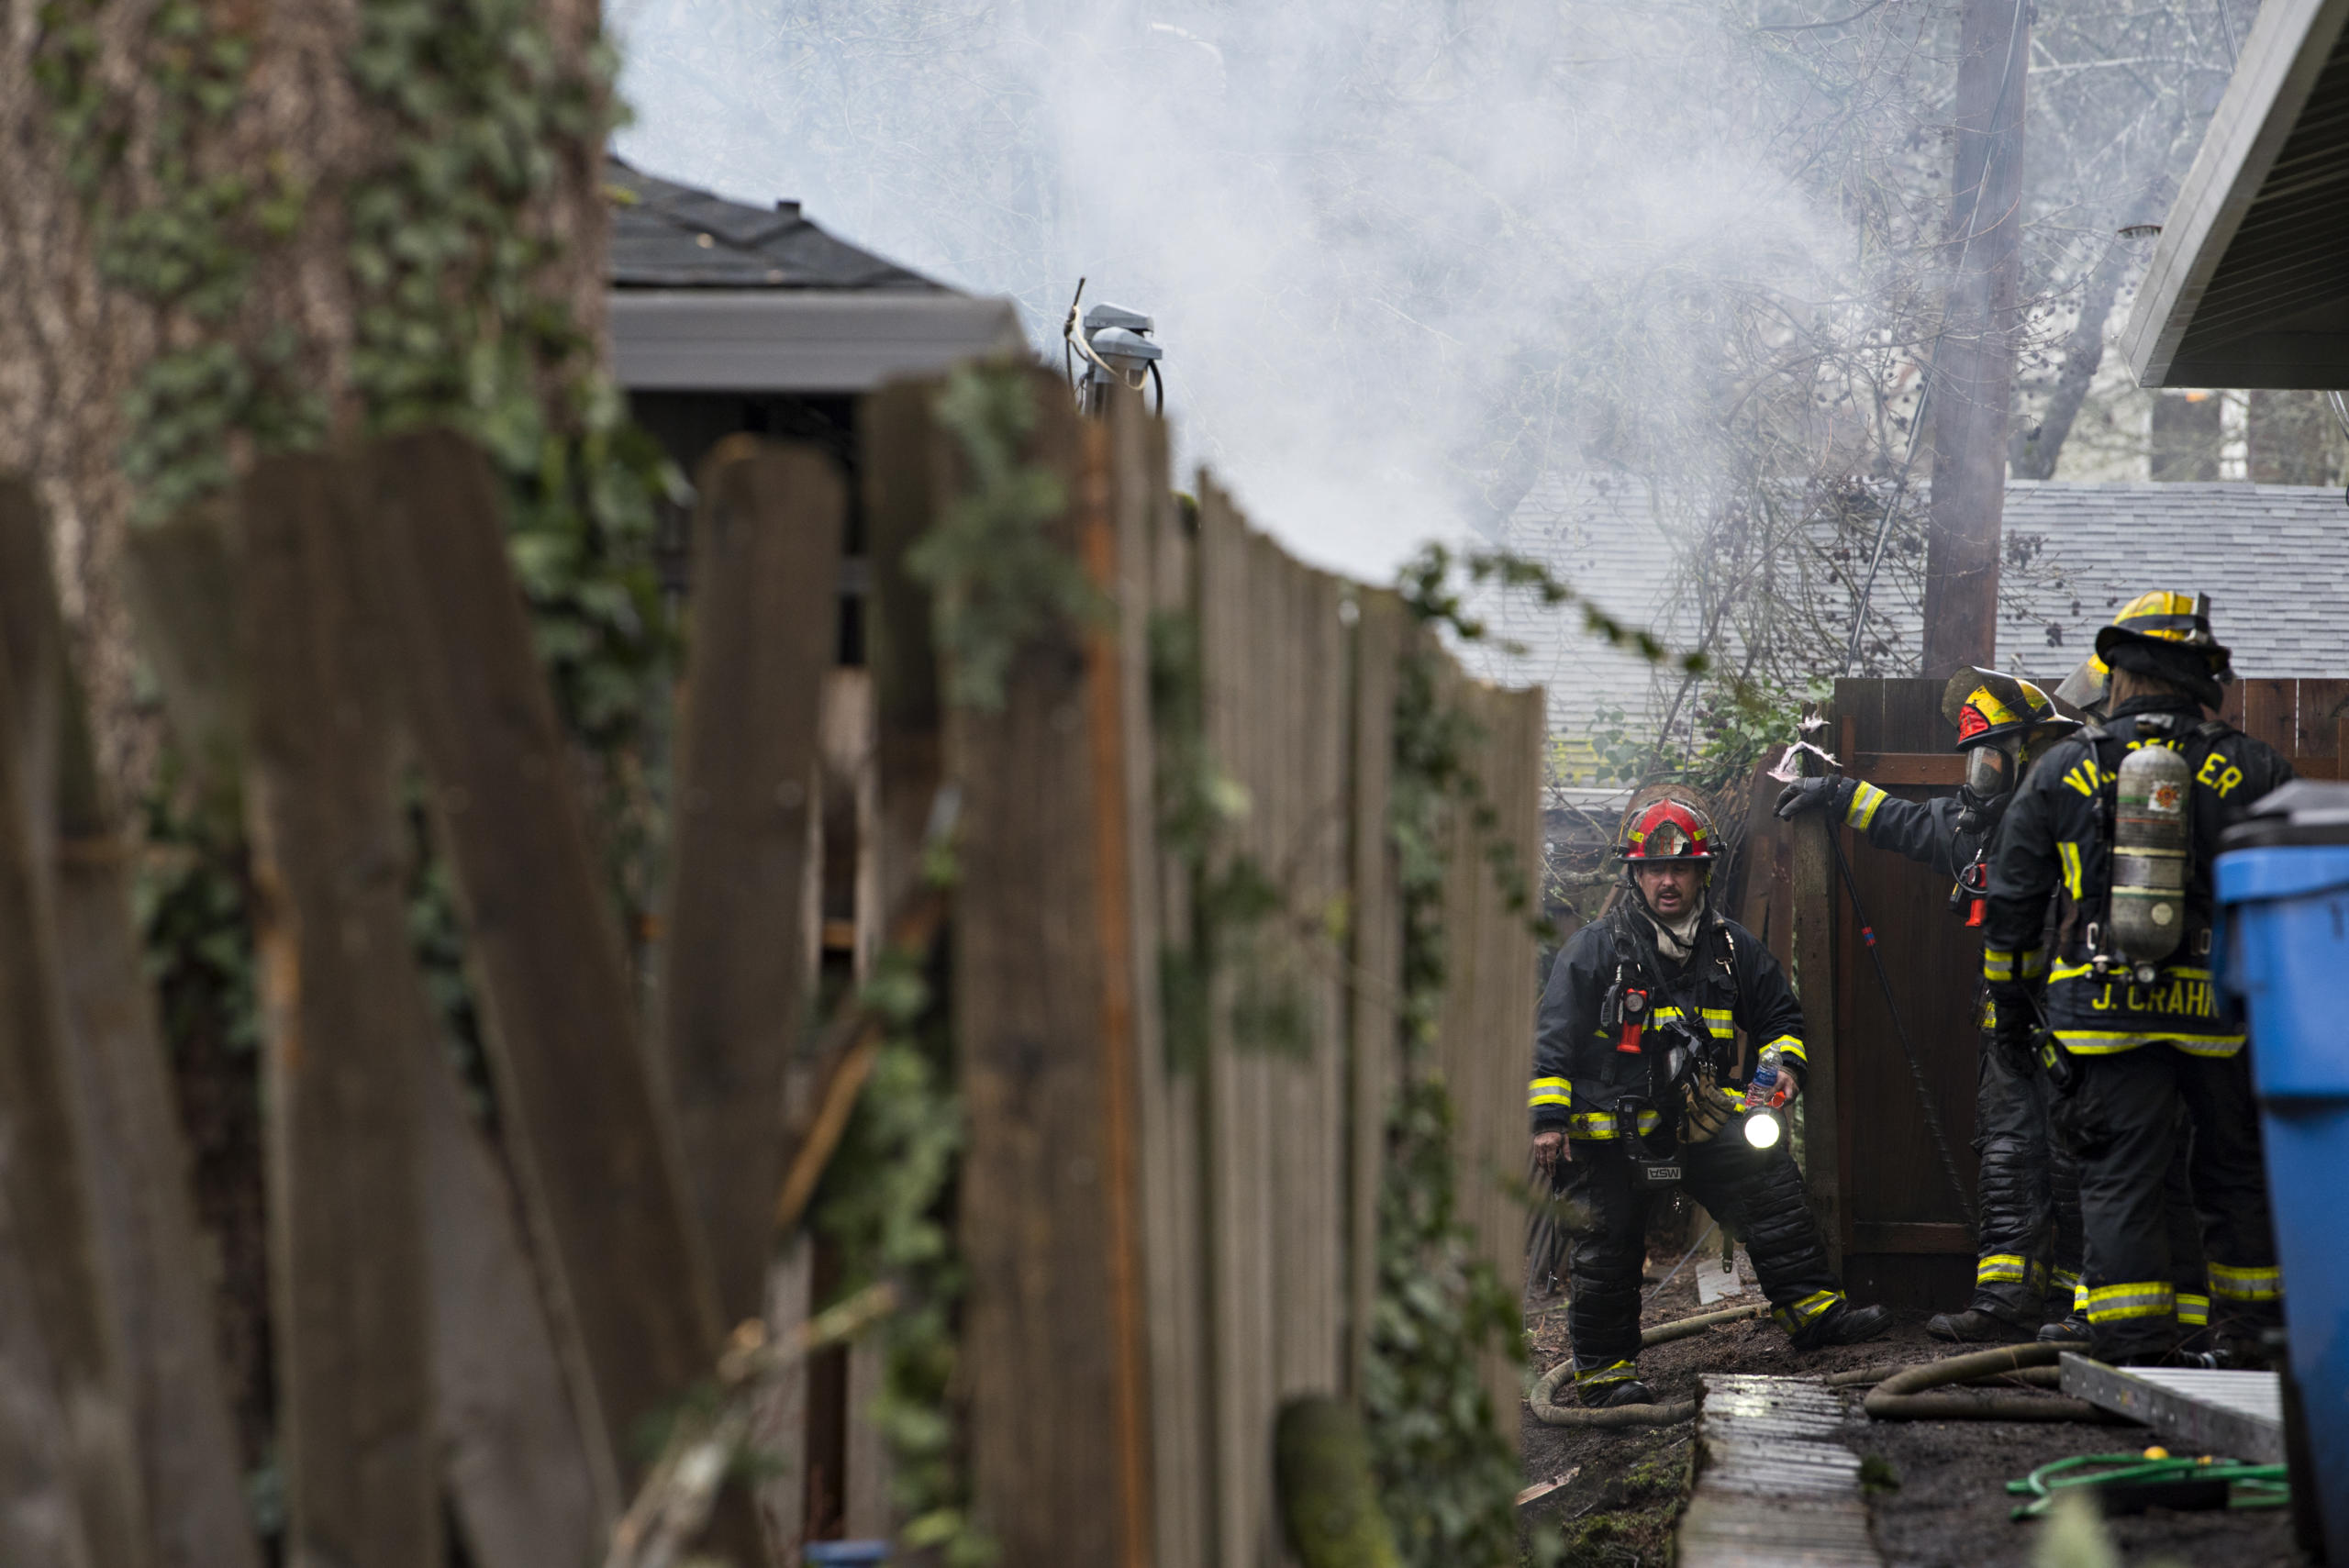 LEADSHOT Firefighters respond to a blaze in two units at the Logan's Court duplex complex in Vancouver's Lincoln neighborhood on Monday afternoon, Feb. 22, 2021.